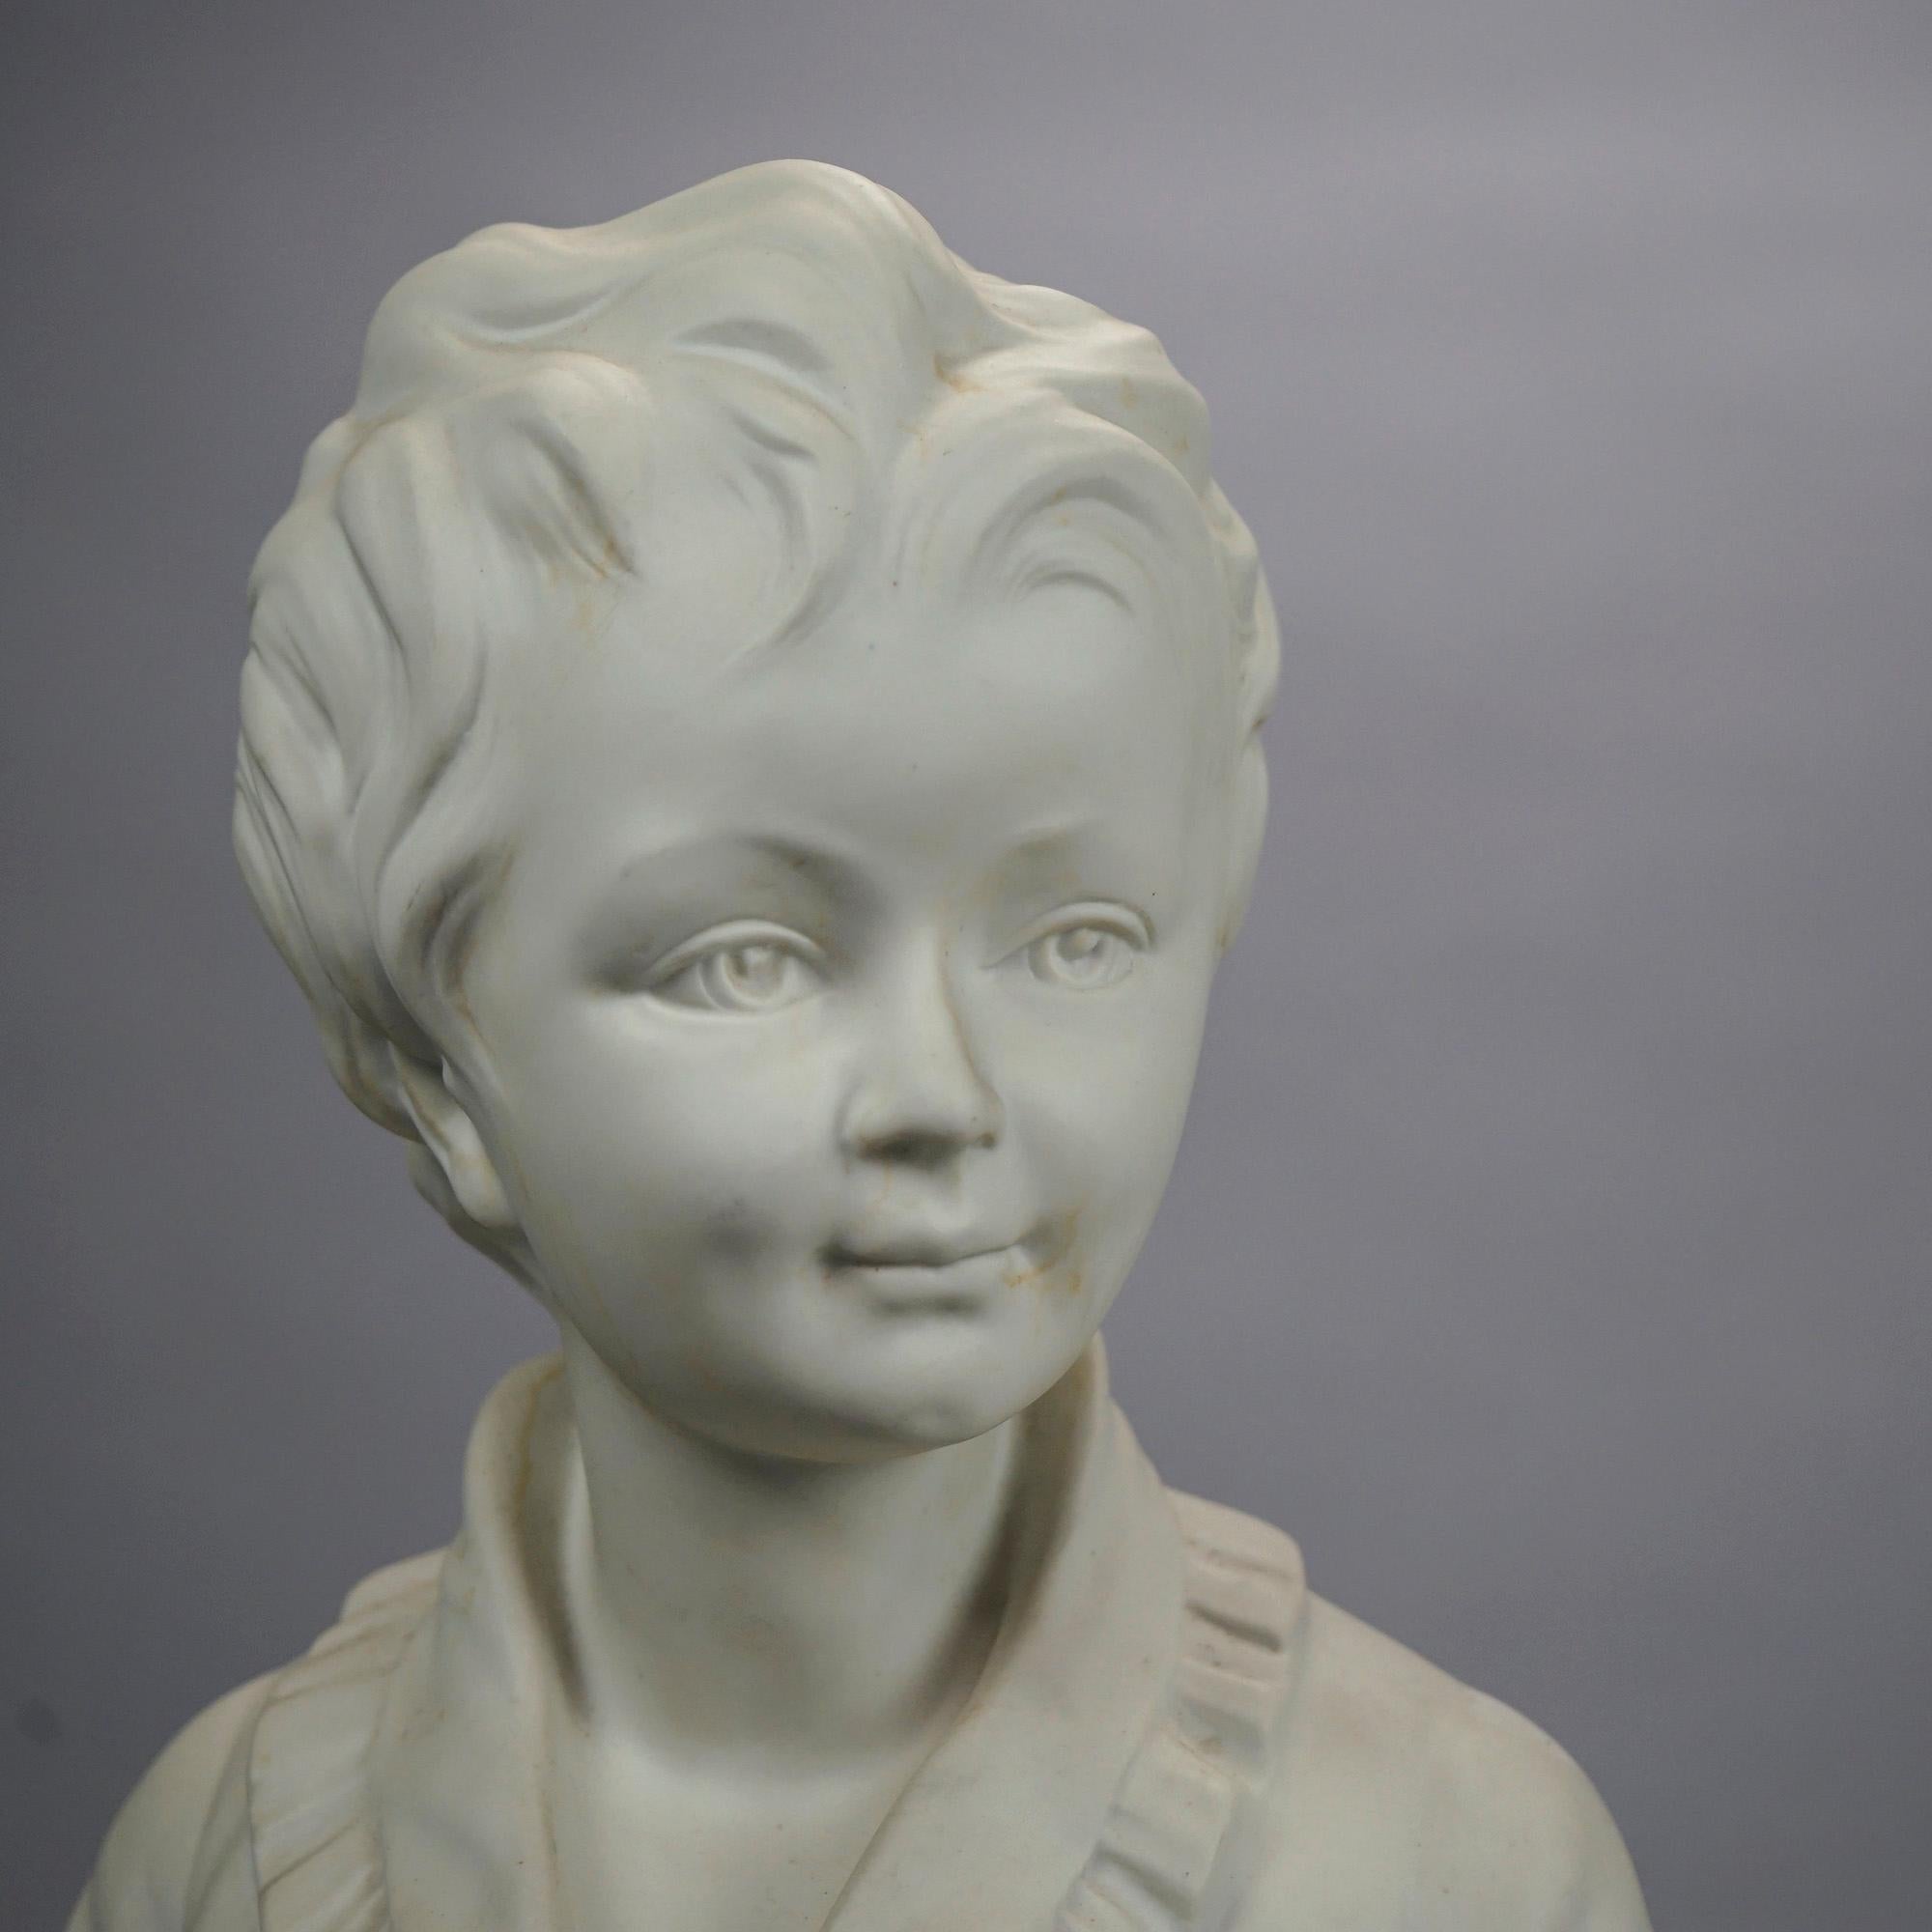 Pair French Limoges Parian Porcelain Bust Sculptures of Young Boy & Girl, 20th C For Sale 2